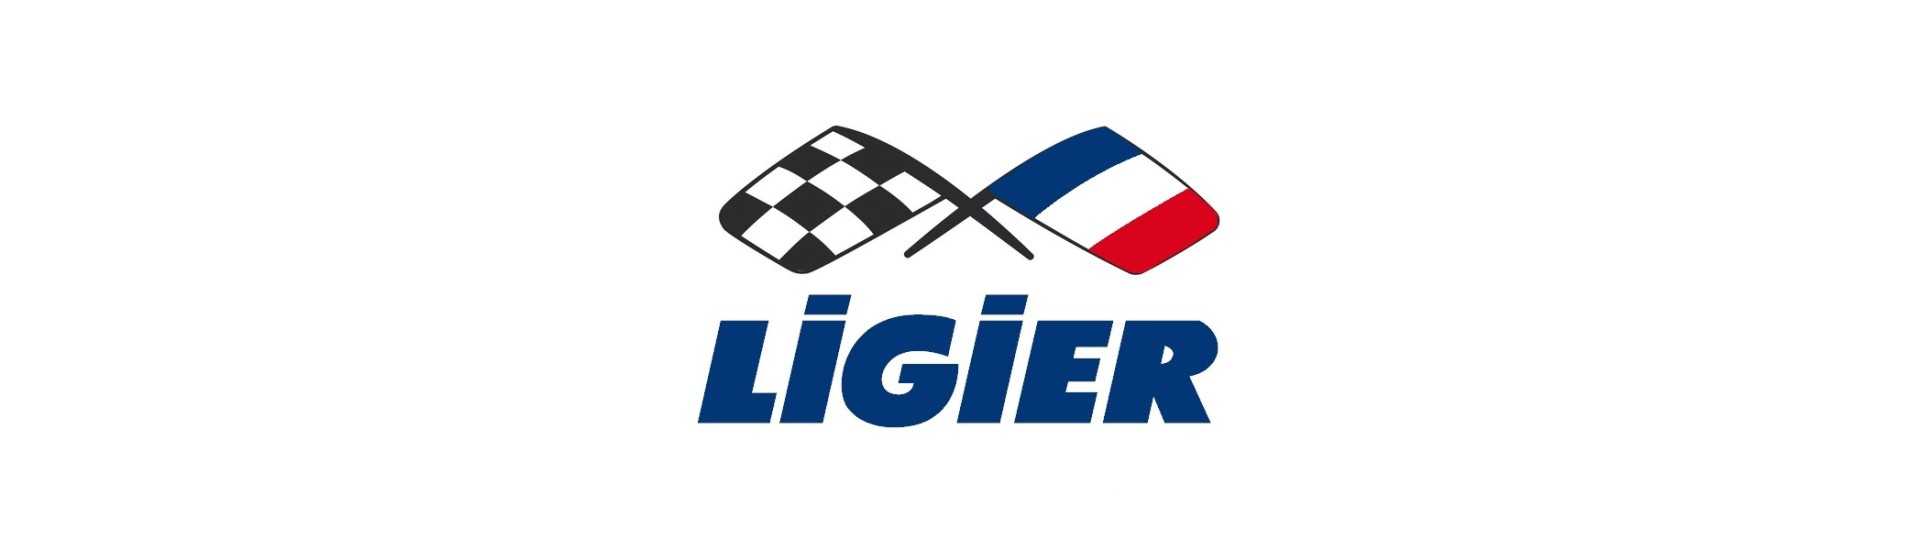 Front triangle at best price for car without a permit Ligier